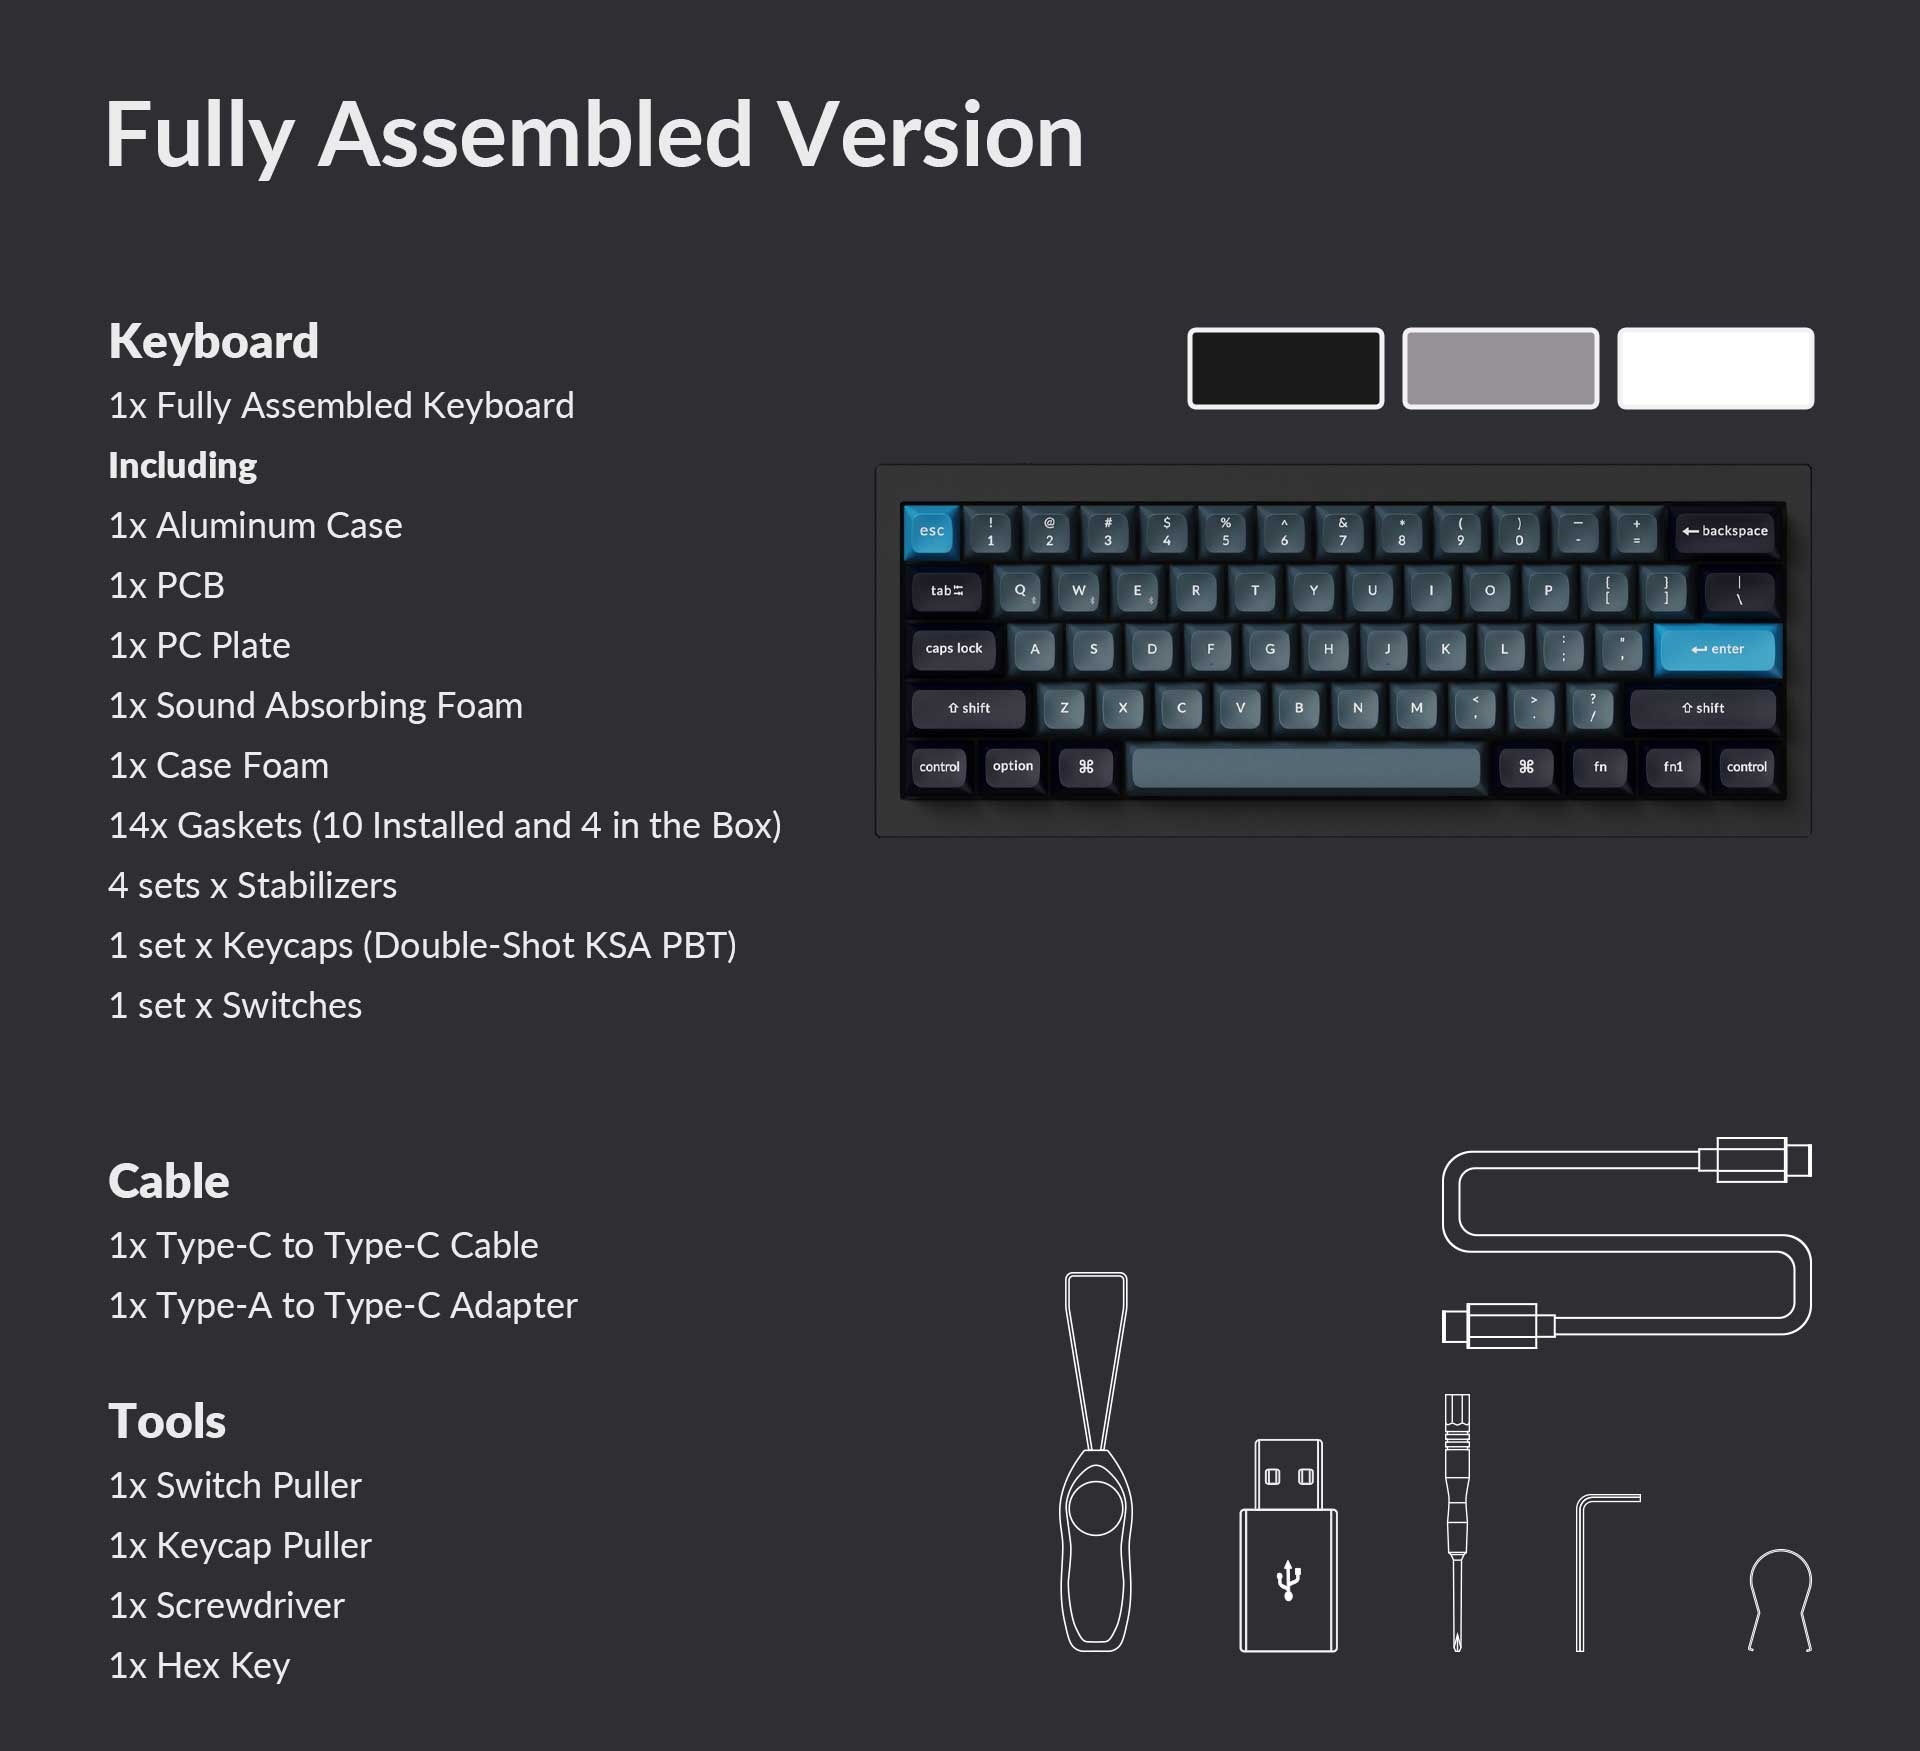 Package list of the Keychron Q4 Pro QMK/VIA 60% layout wireless custom mechanical keyboard fully assembled version